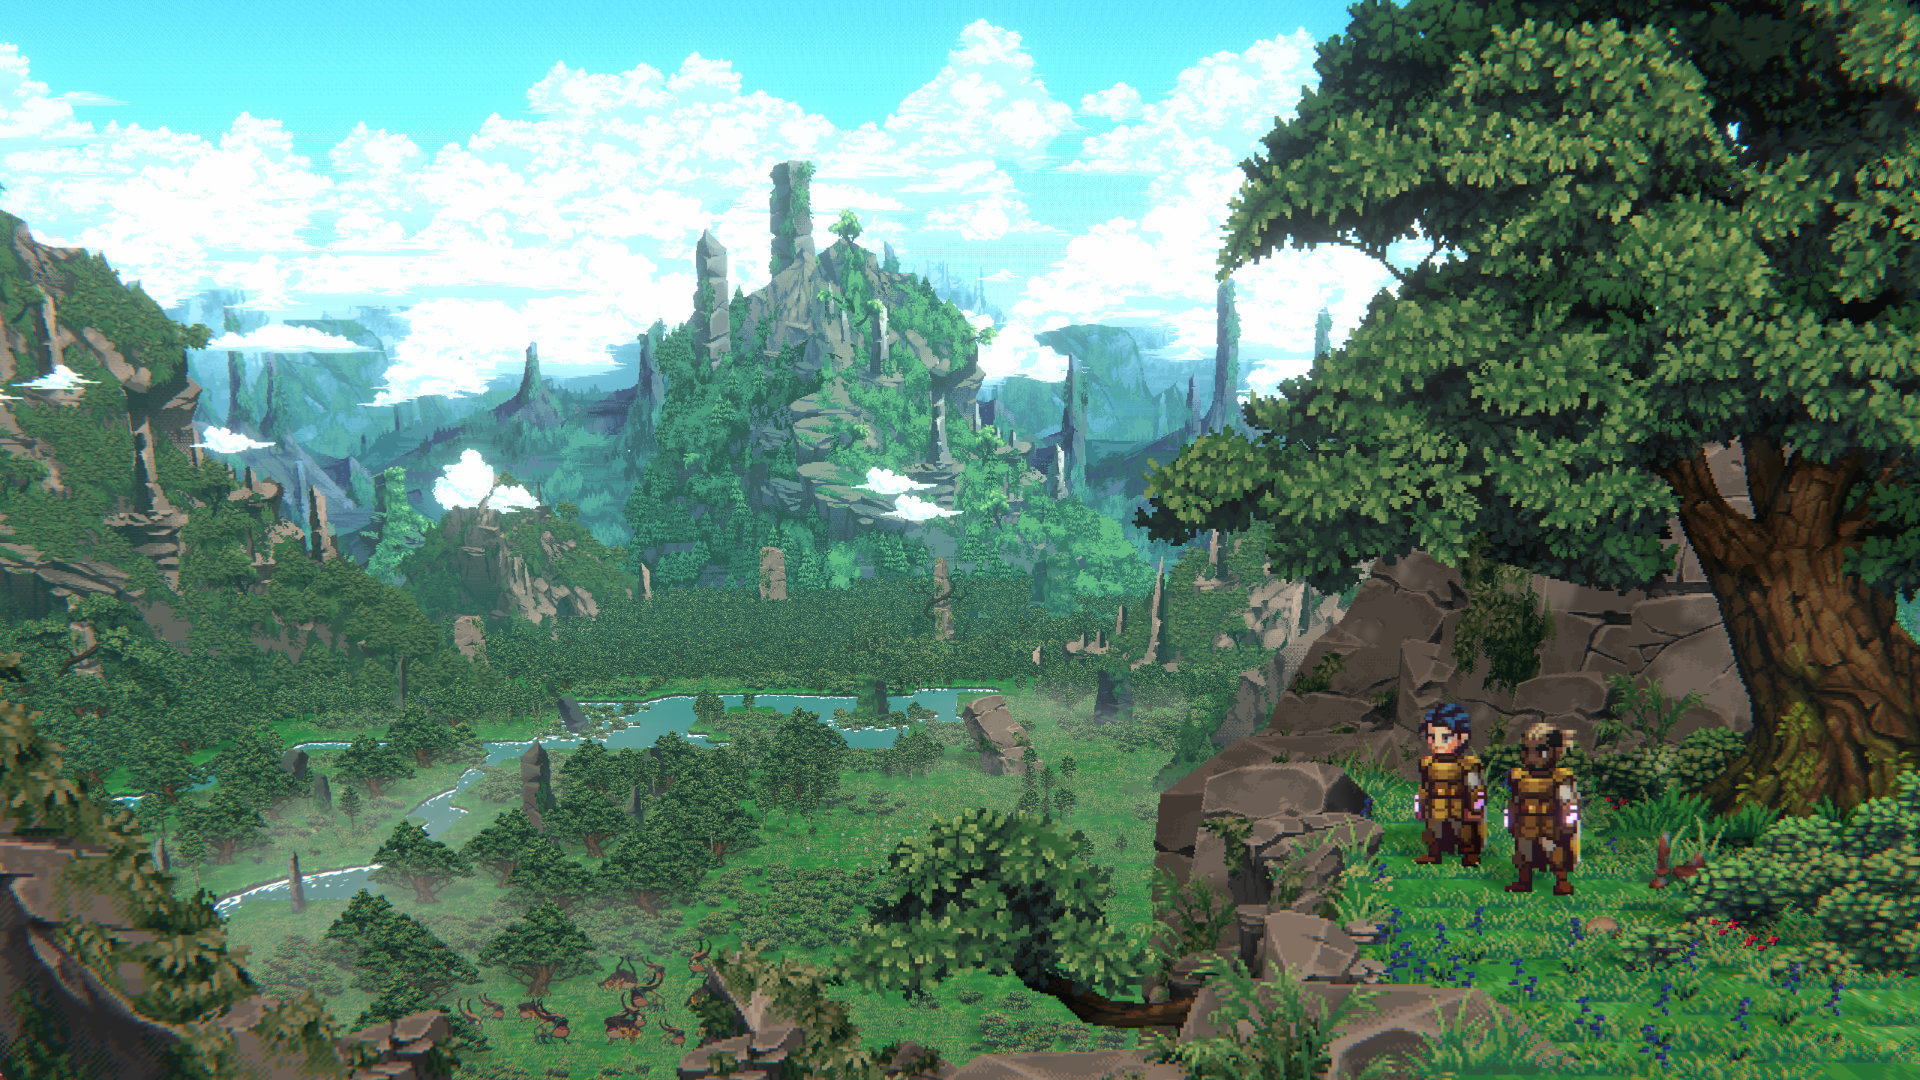 SacriFire screenshot of a person on top of a lush mountain overlooking a vast valley with ruins in the distance.